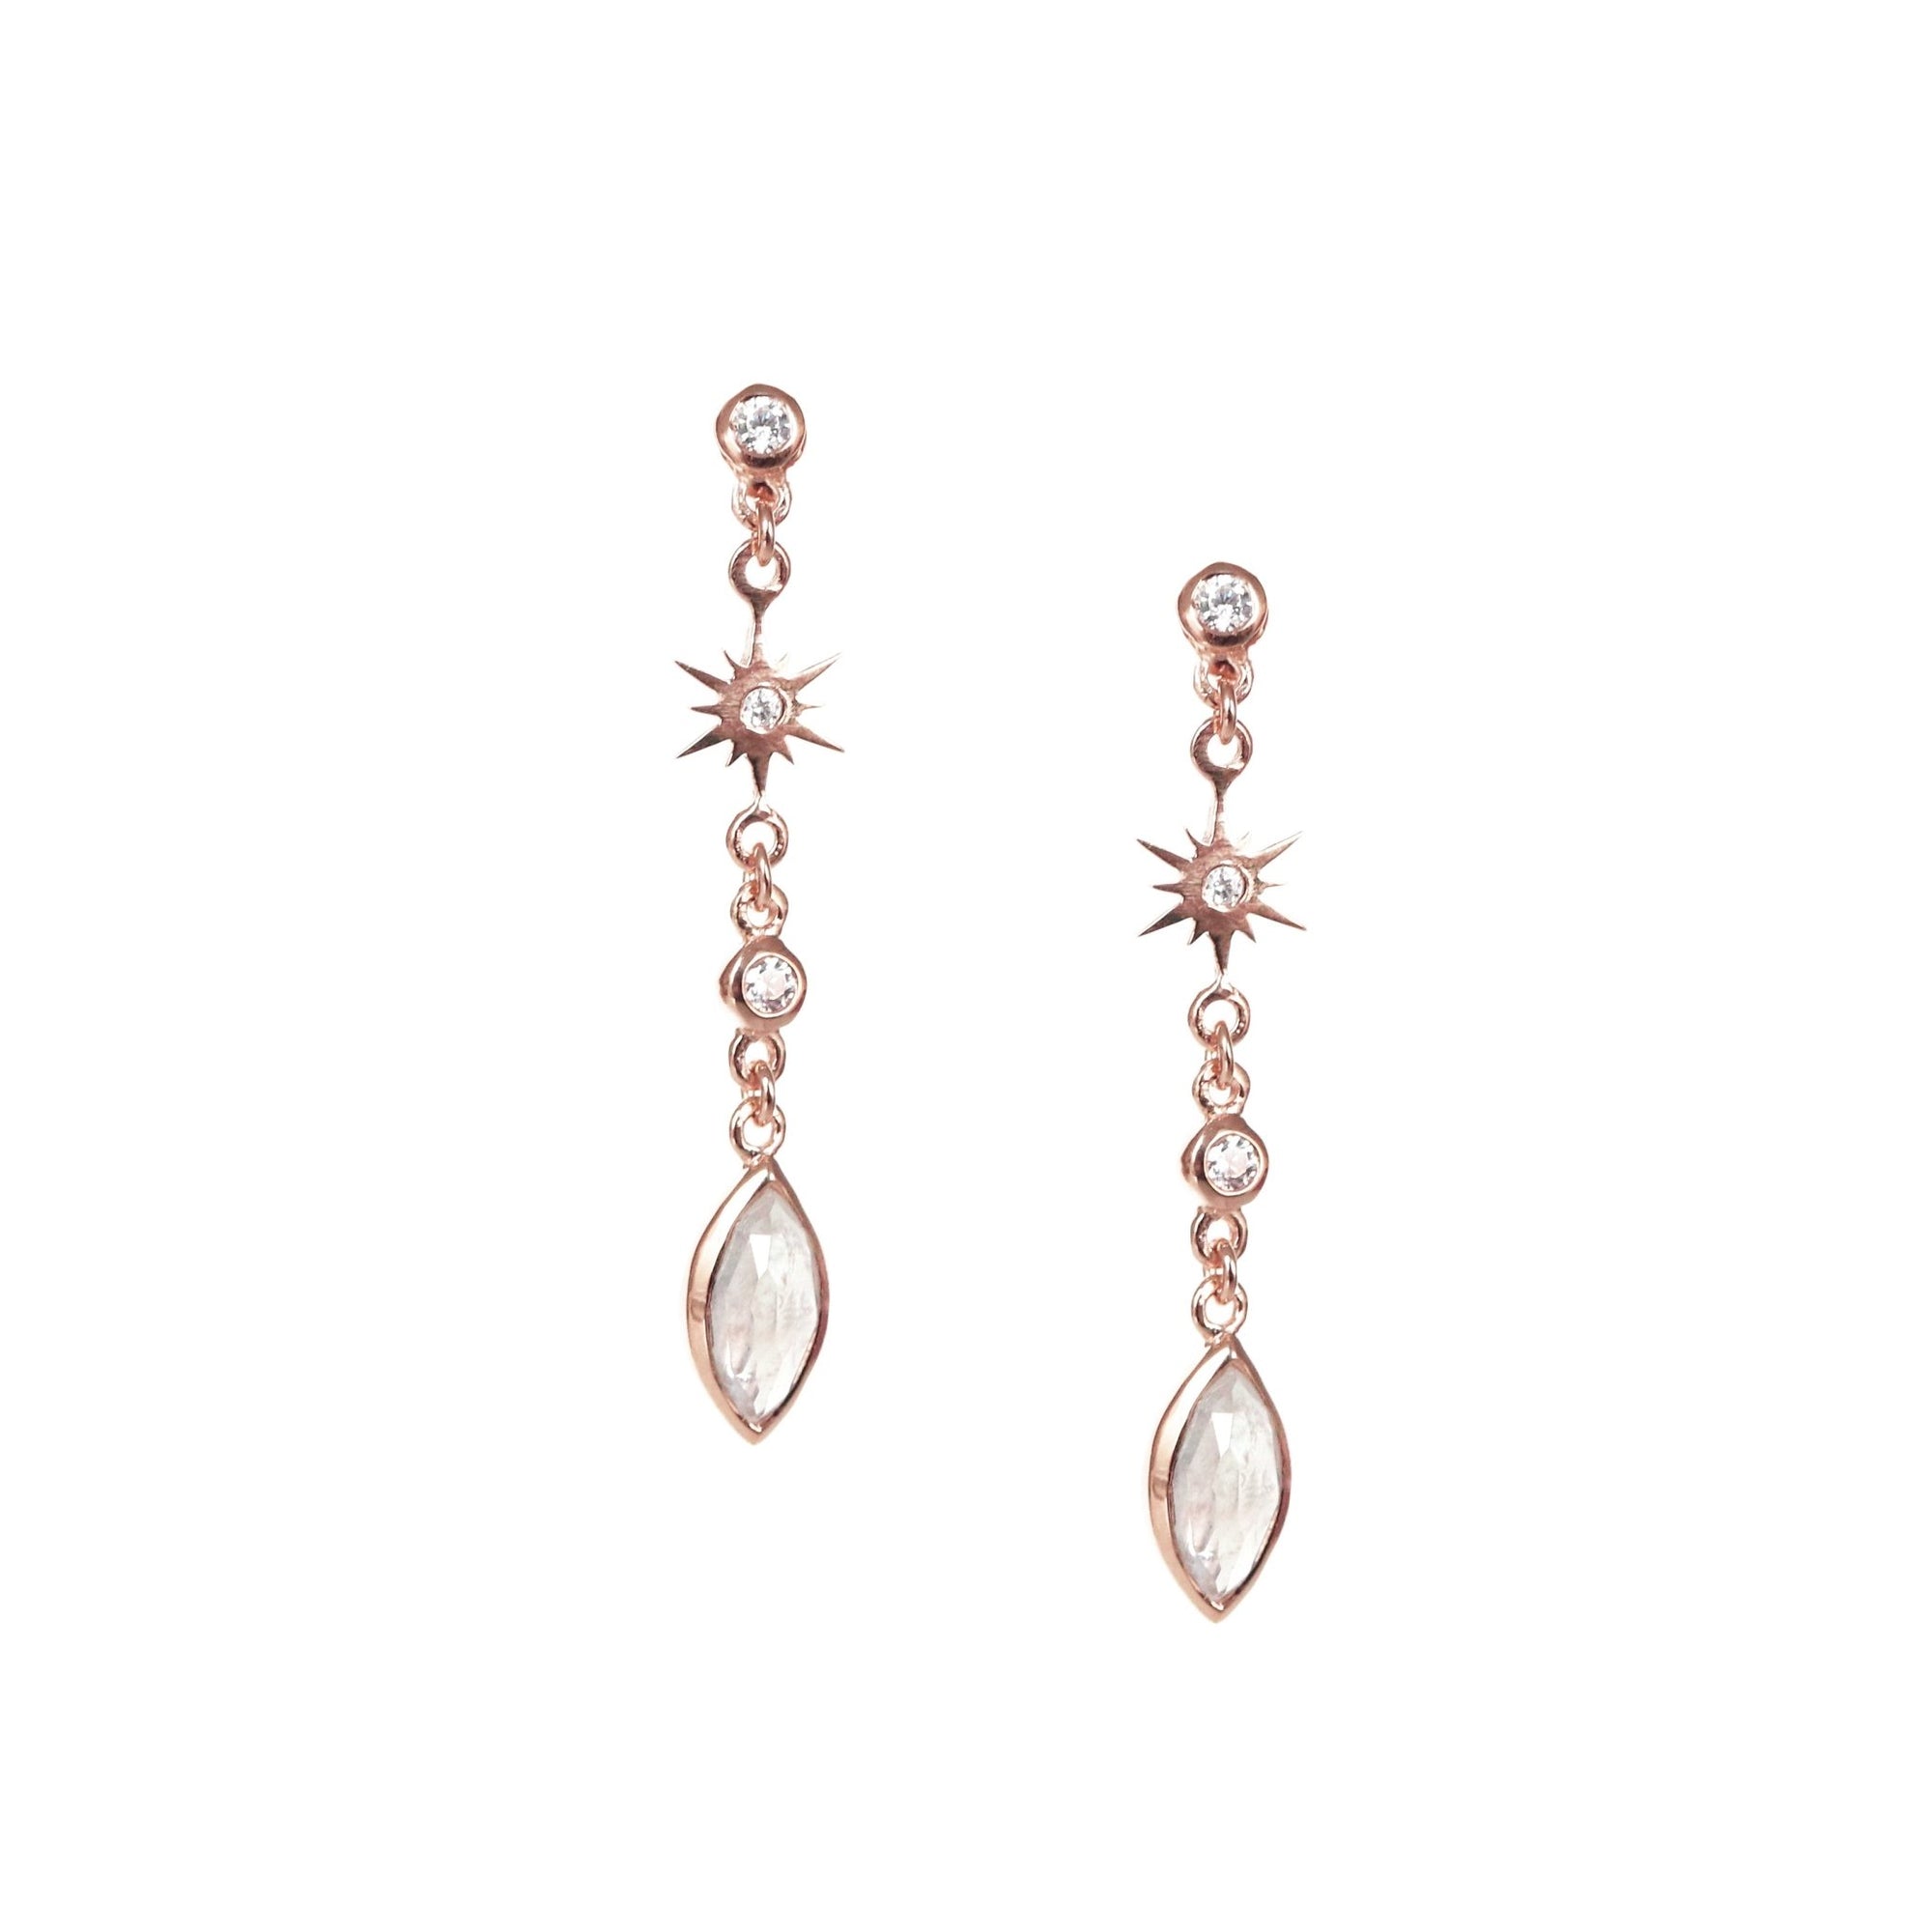 TINY BELIEVE MARQUISE DROP EARRINGS - CUBIC ZIRCONIA, MOONSTONE & ROSE GOLD - SO PRETTY CARA COTTER